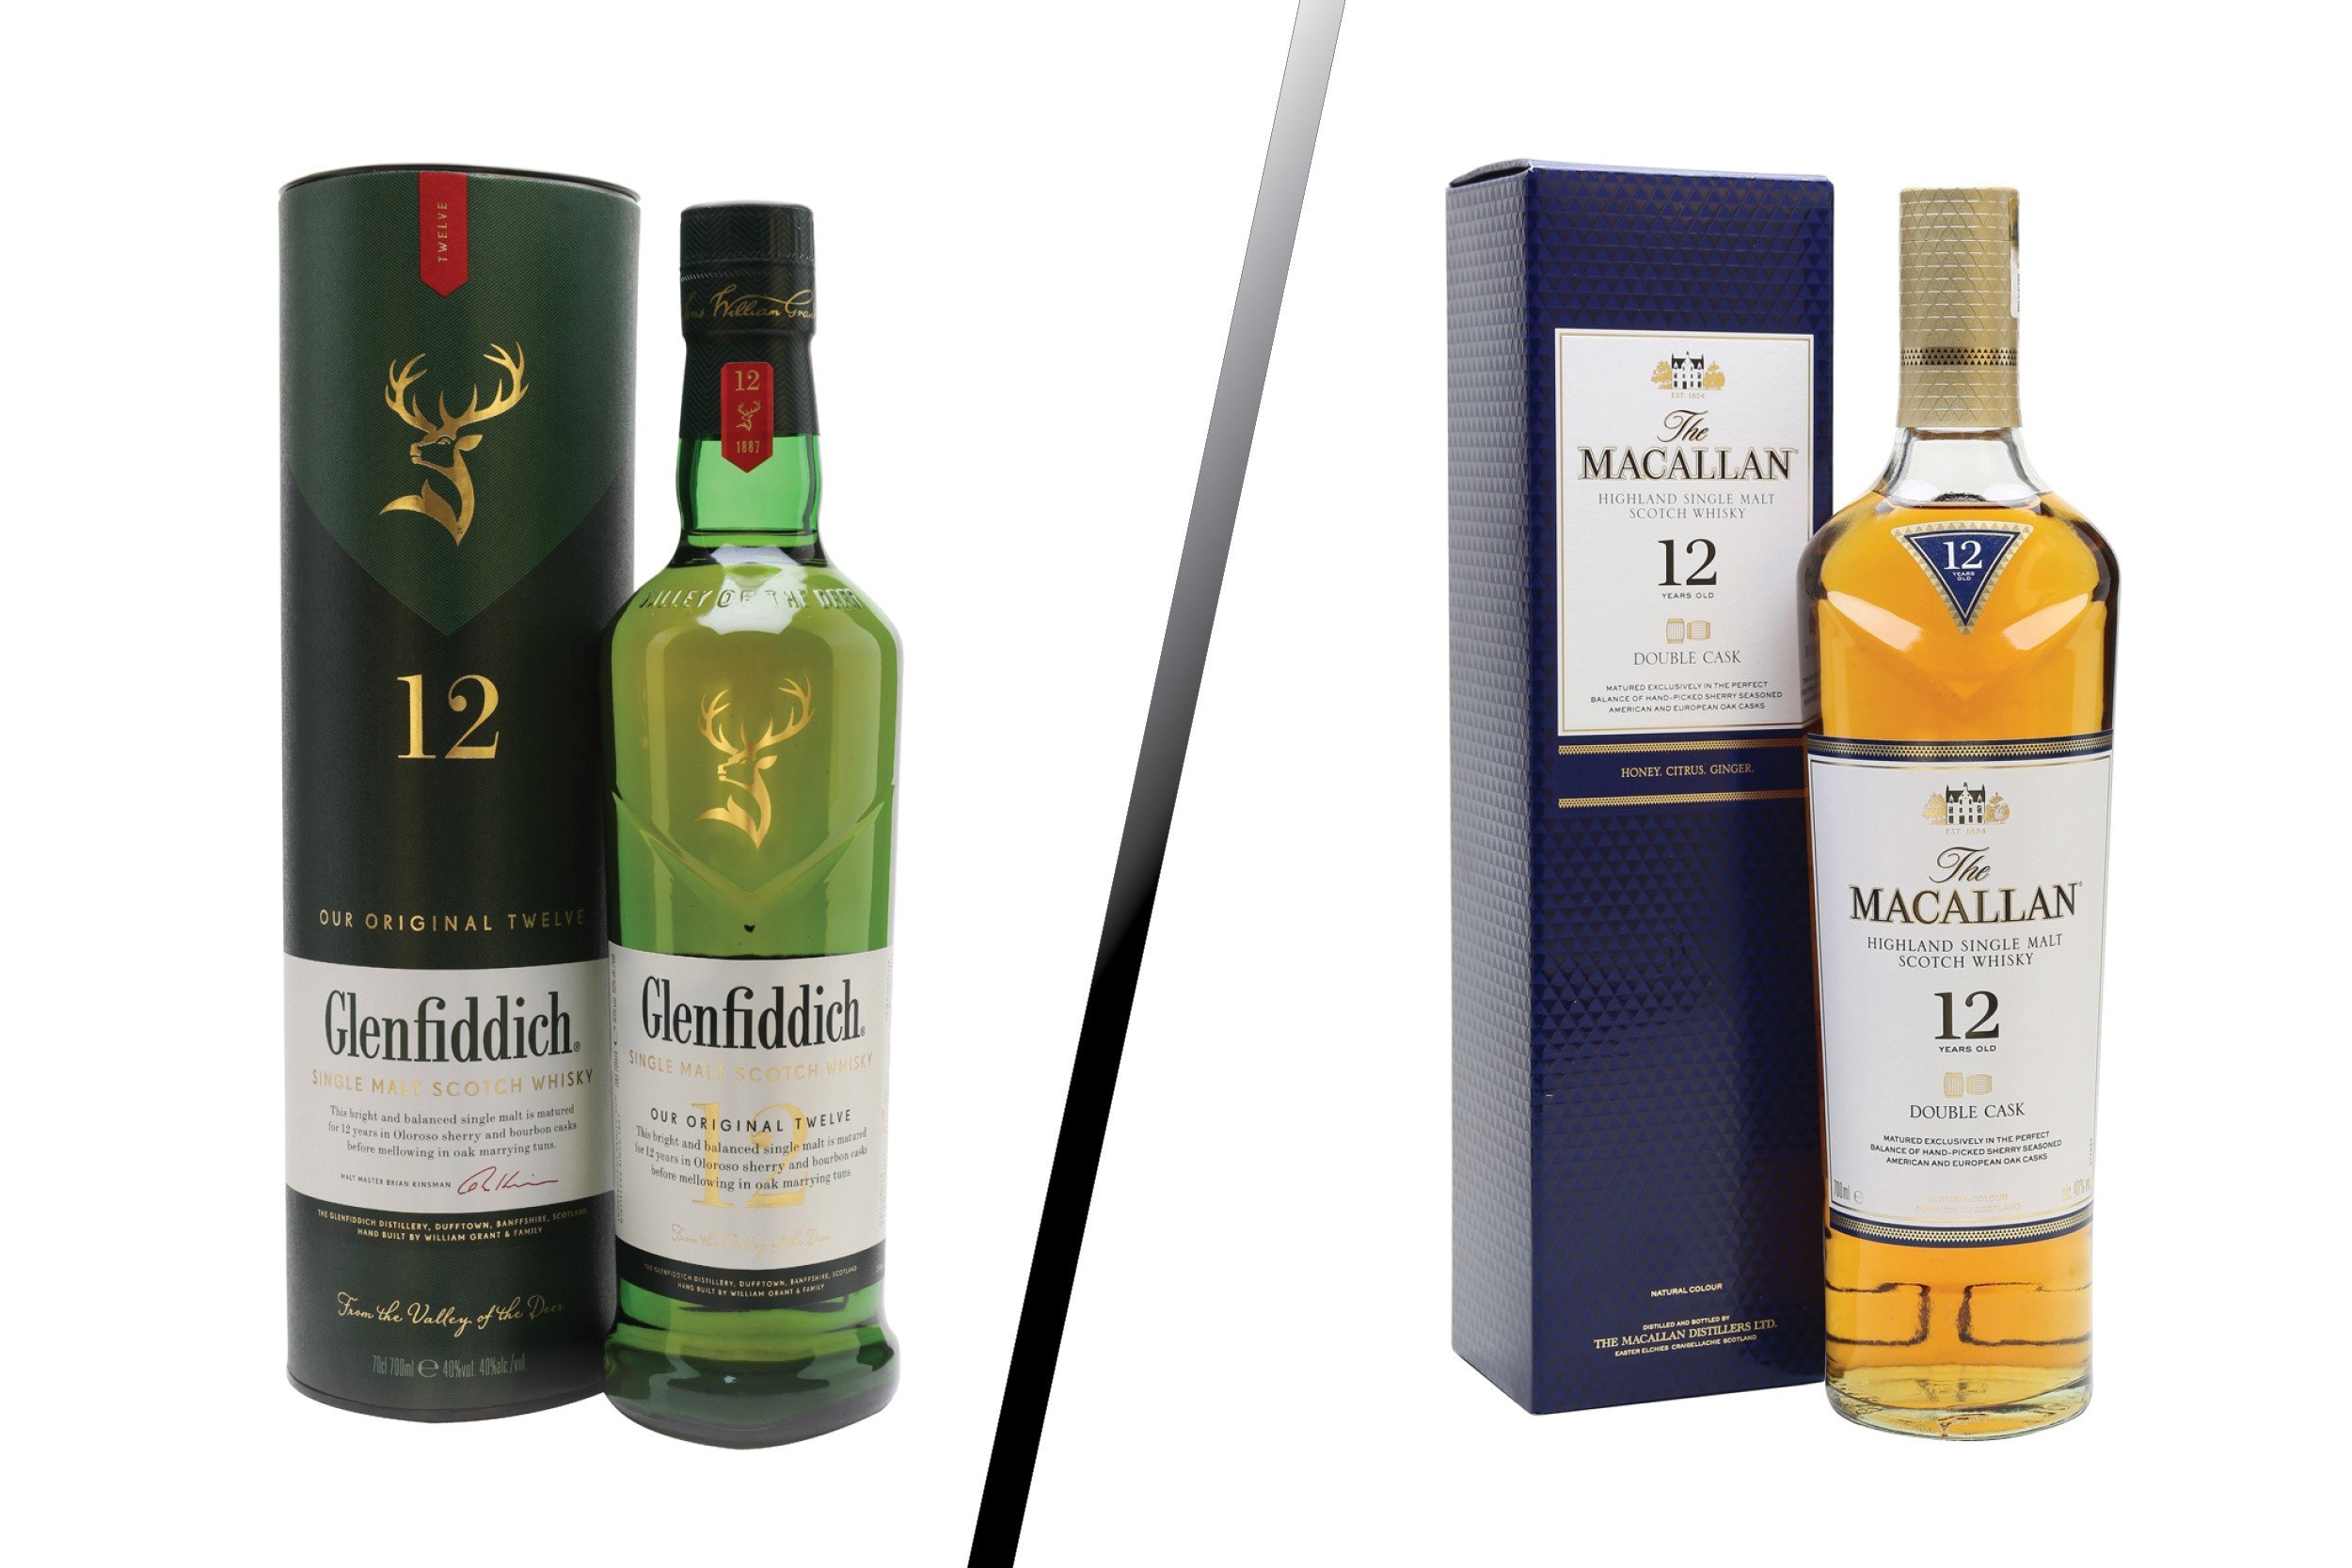 Which is the better entry-level whisky? Photo: Macallan and Glenfiddich